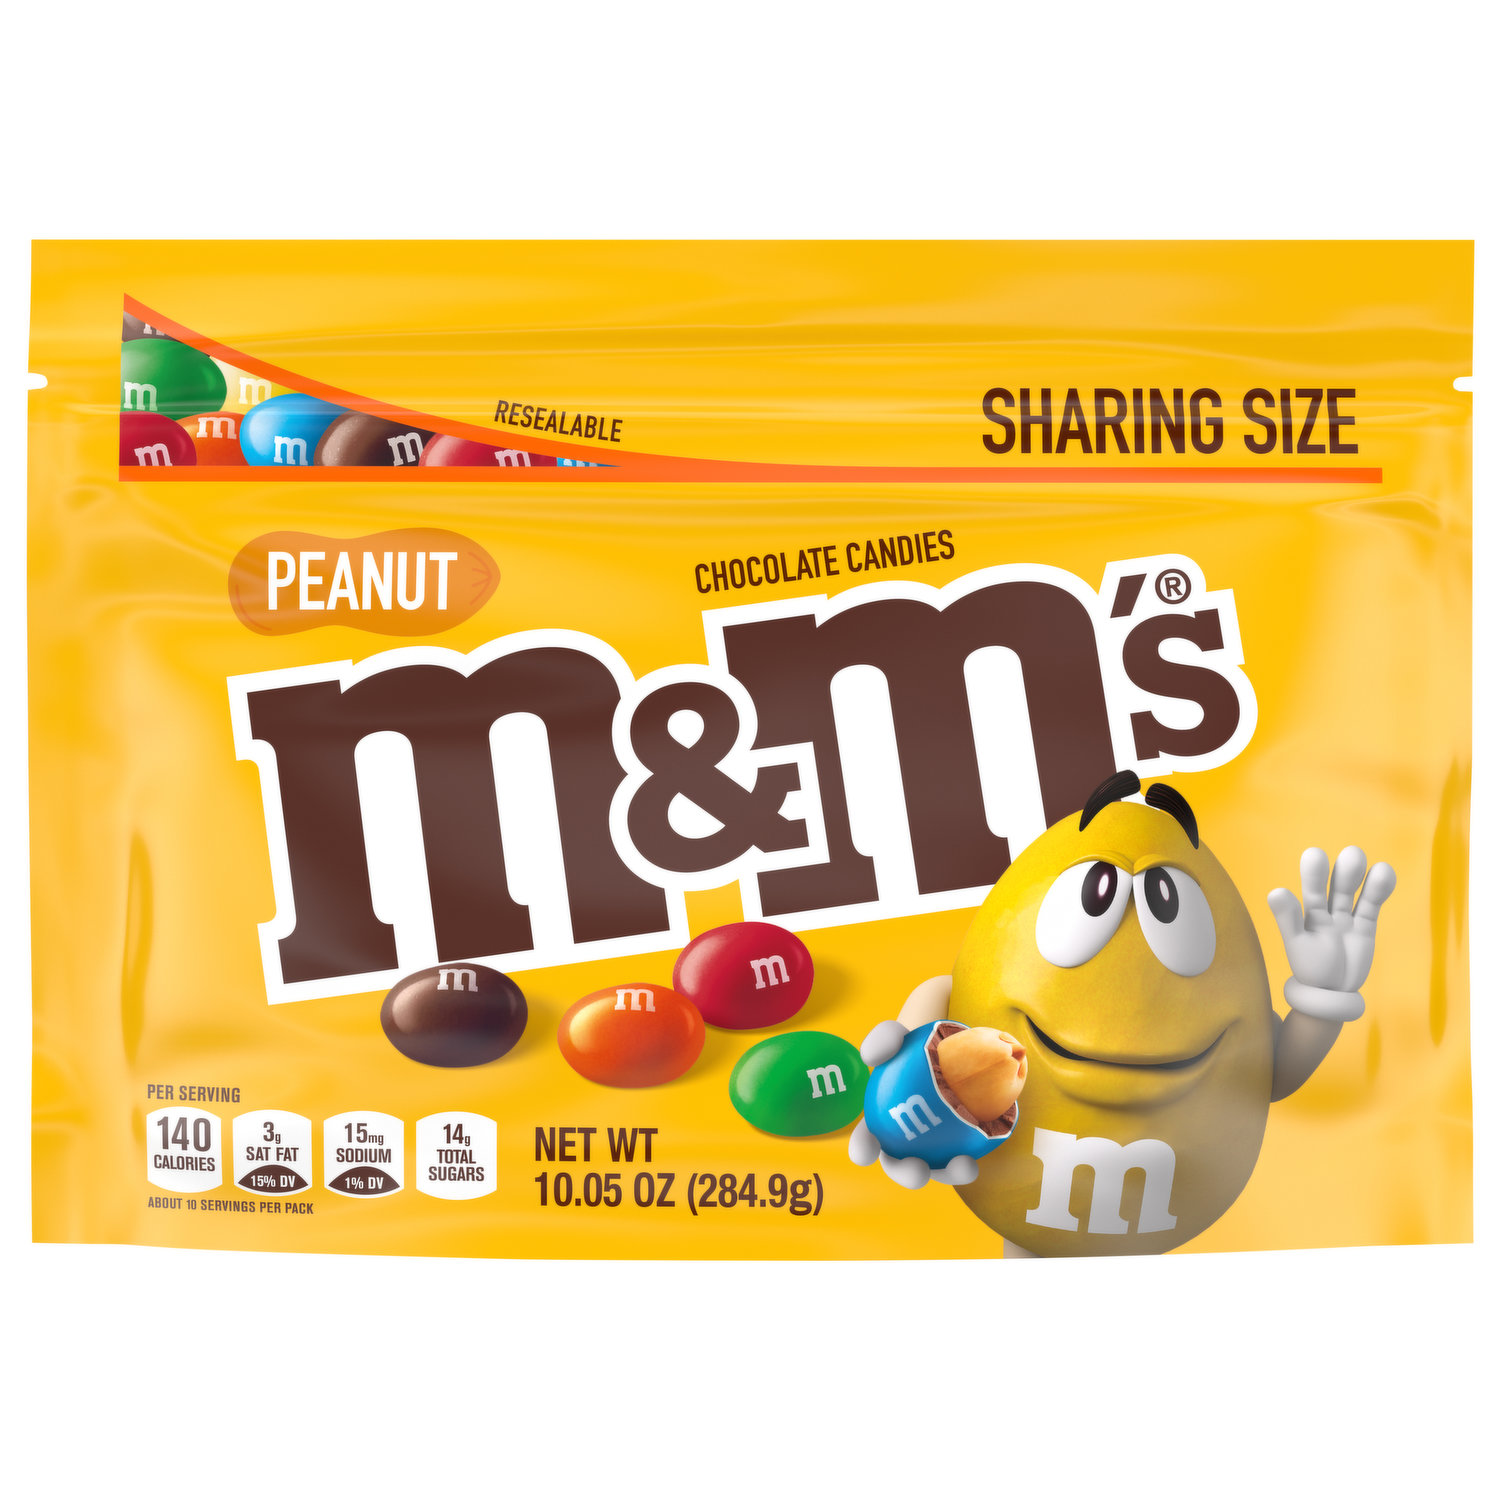 M&M's Chocolate Candies, Peanut, Red, White & Blue Mix, Share Size